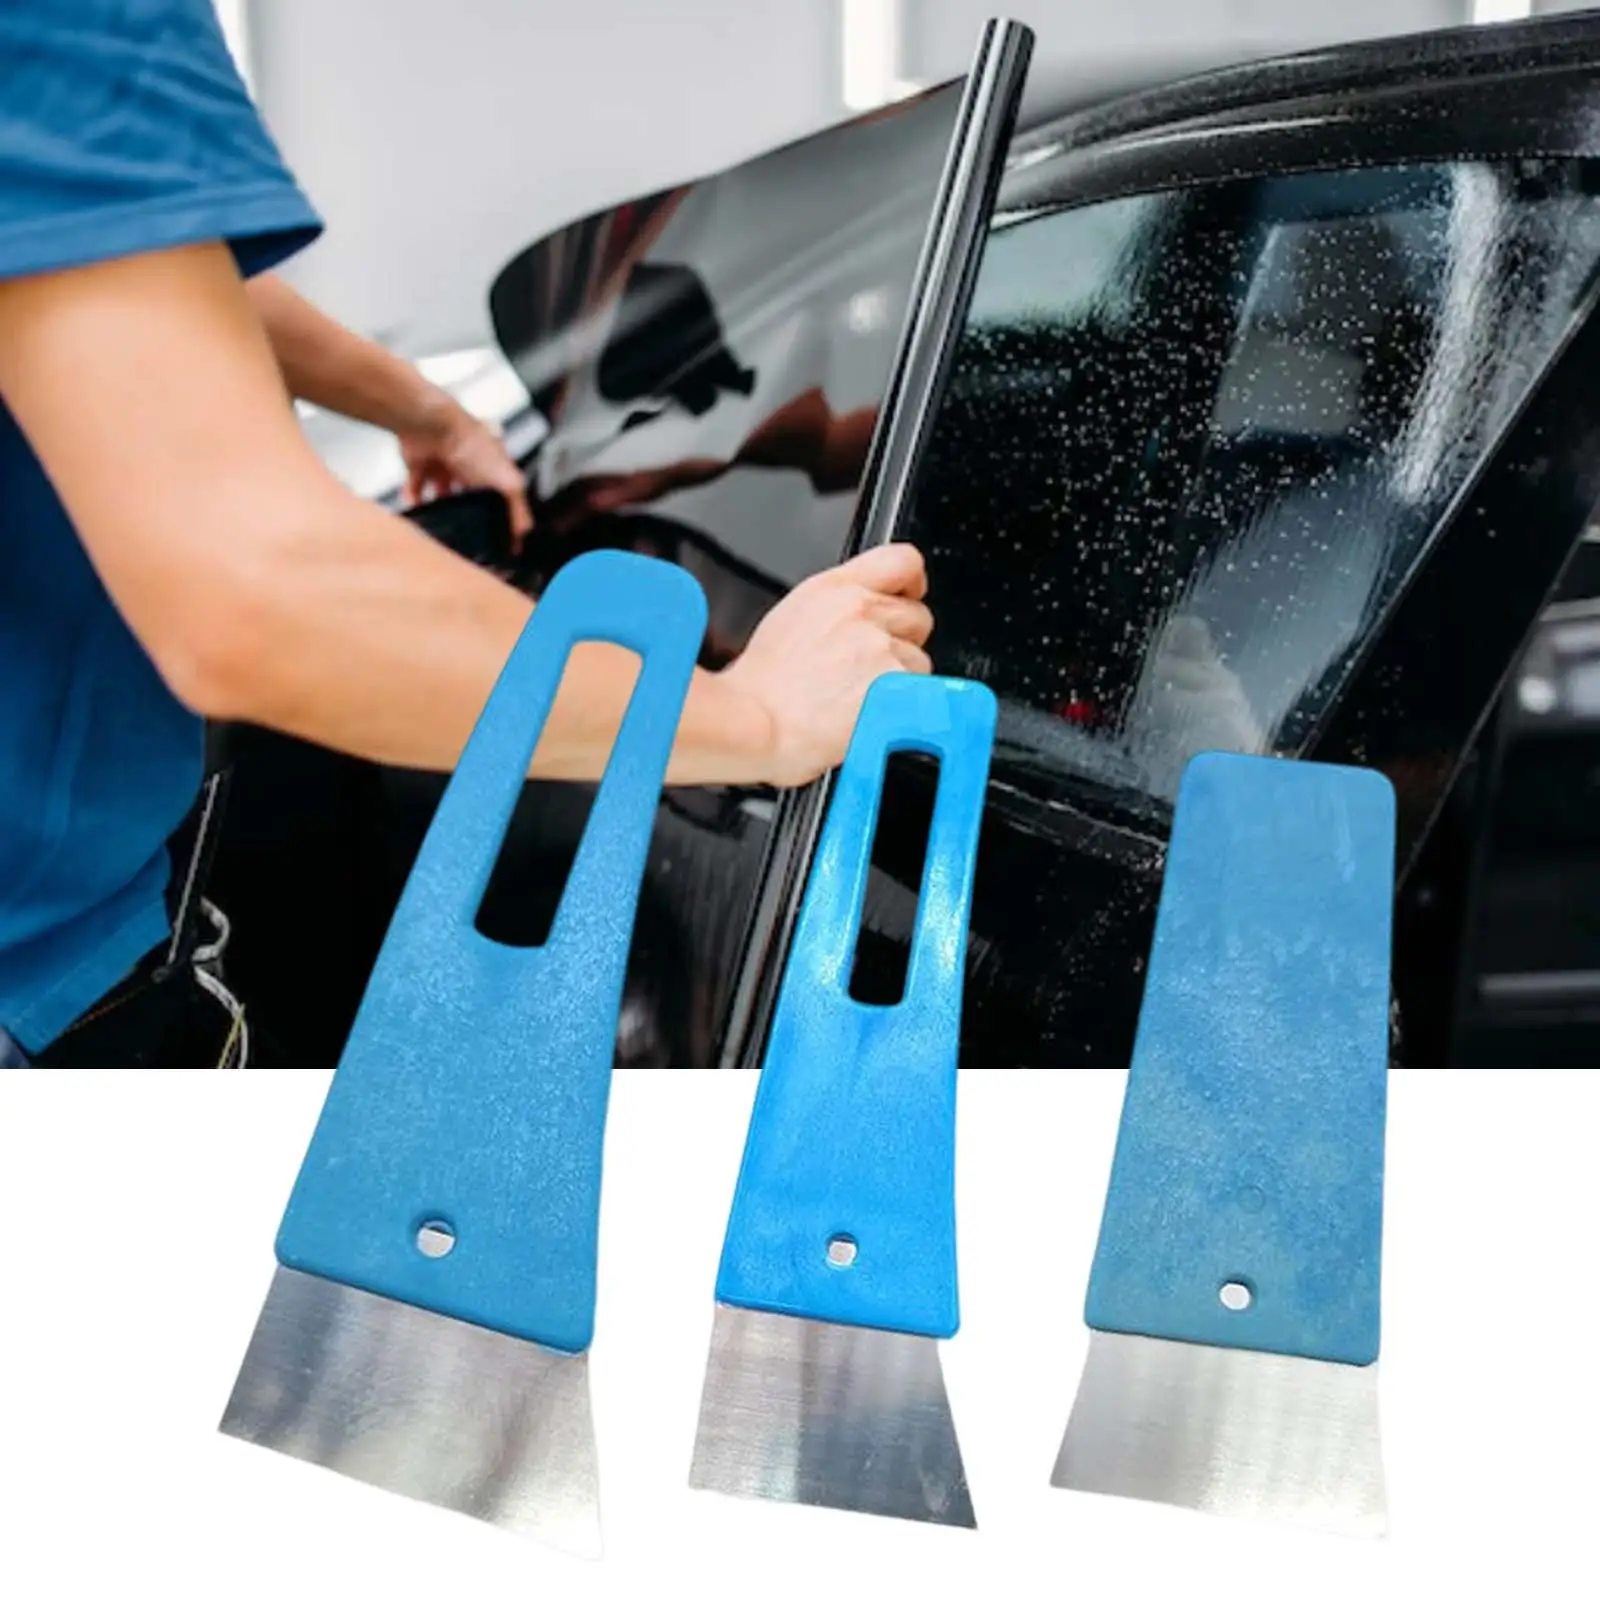 3 Pieces Car Window Film Scraper Squeegee Set Long Handle Cleaning Accessories for Wallpaper